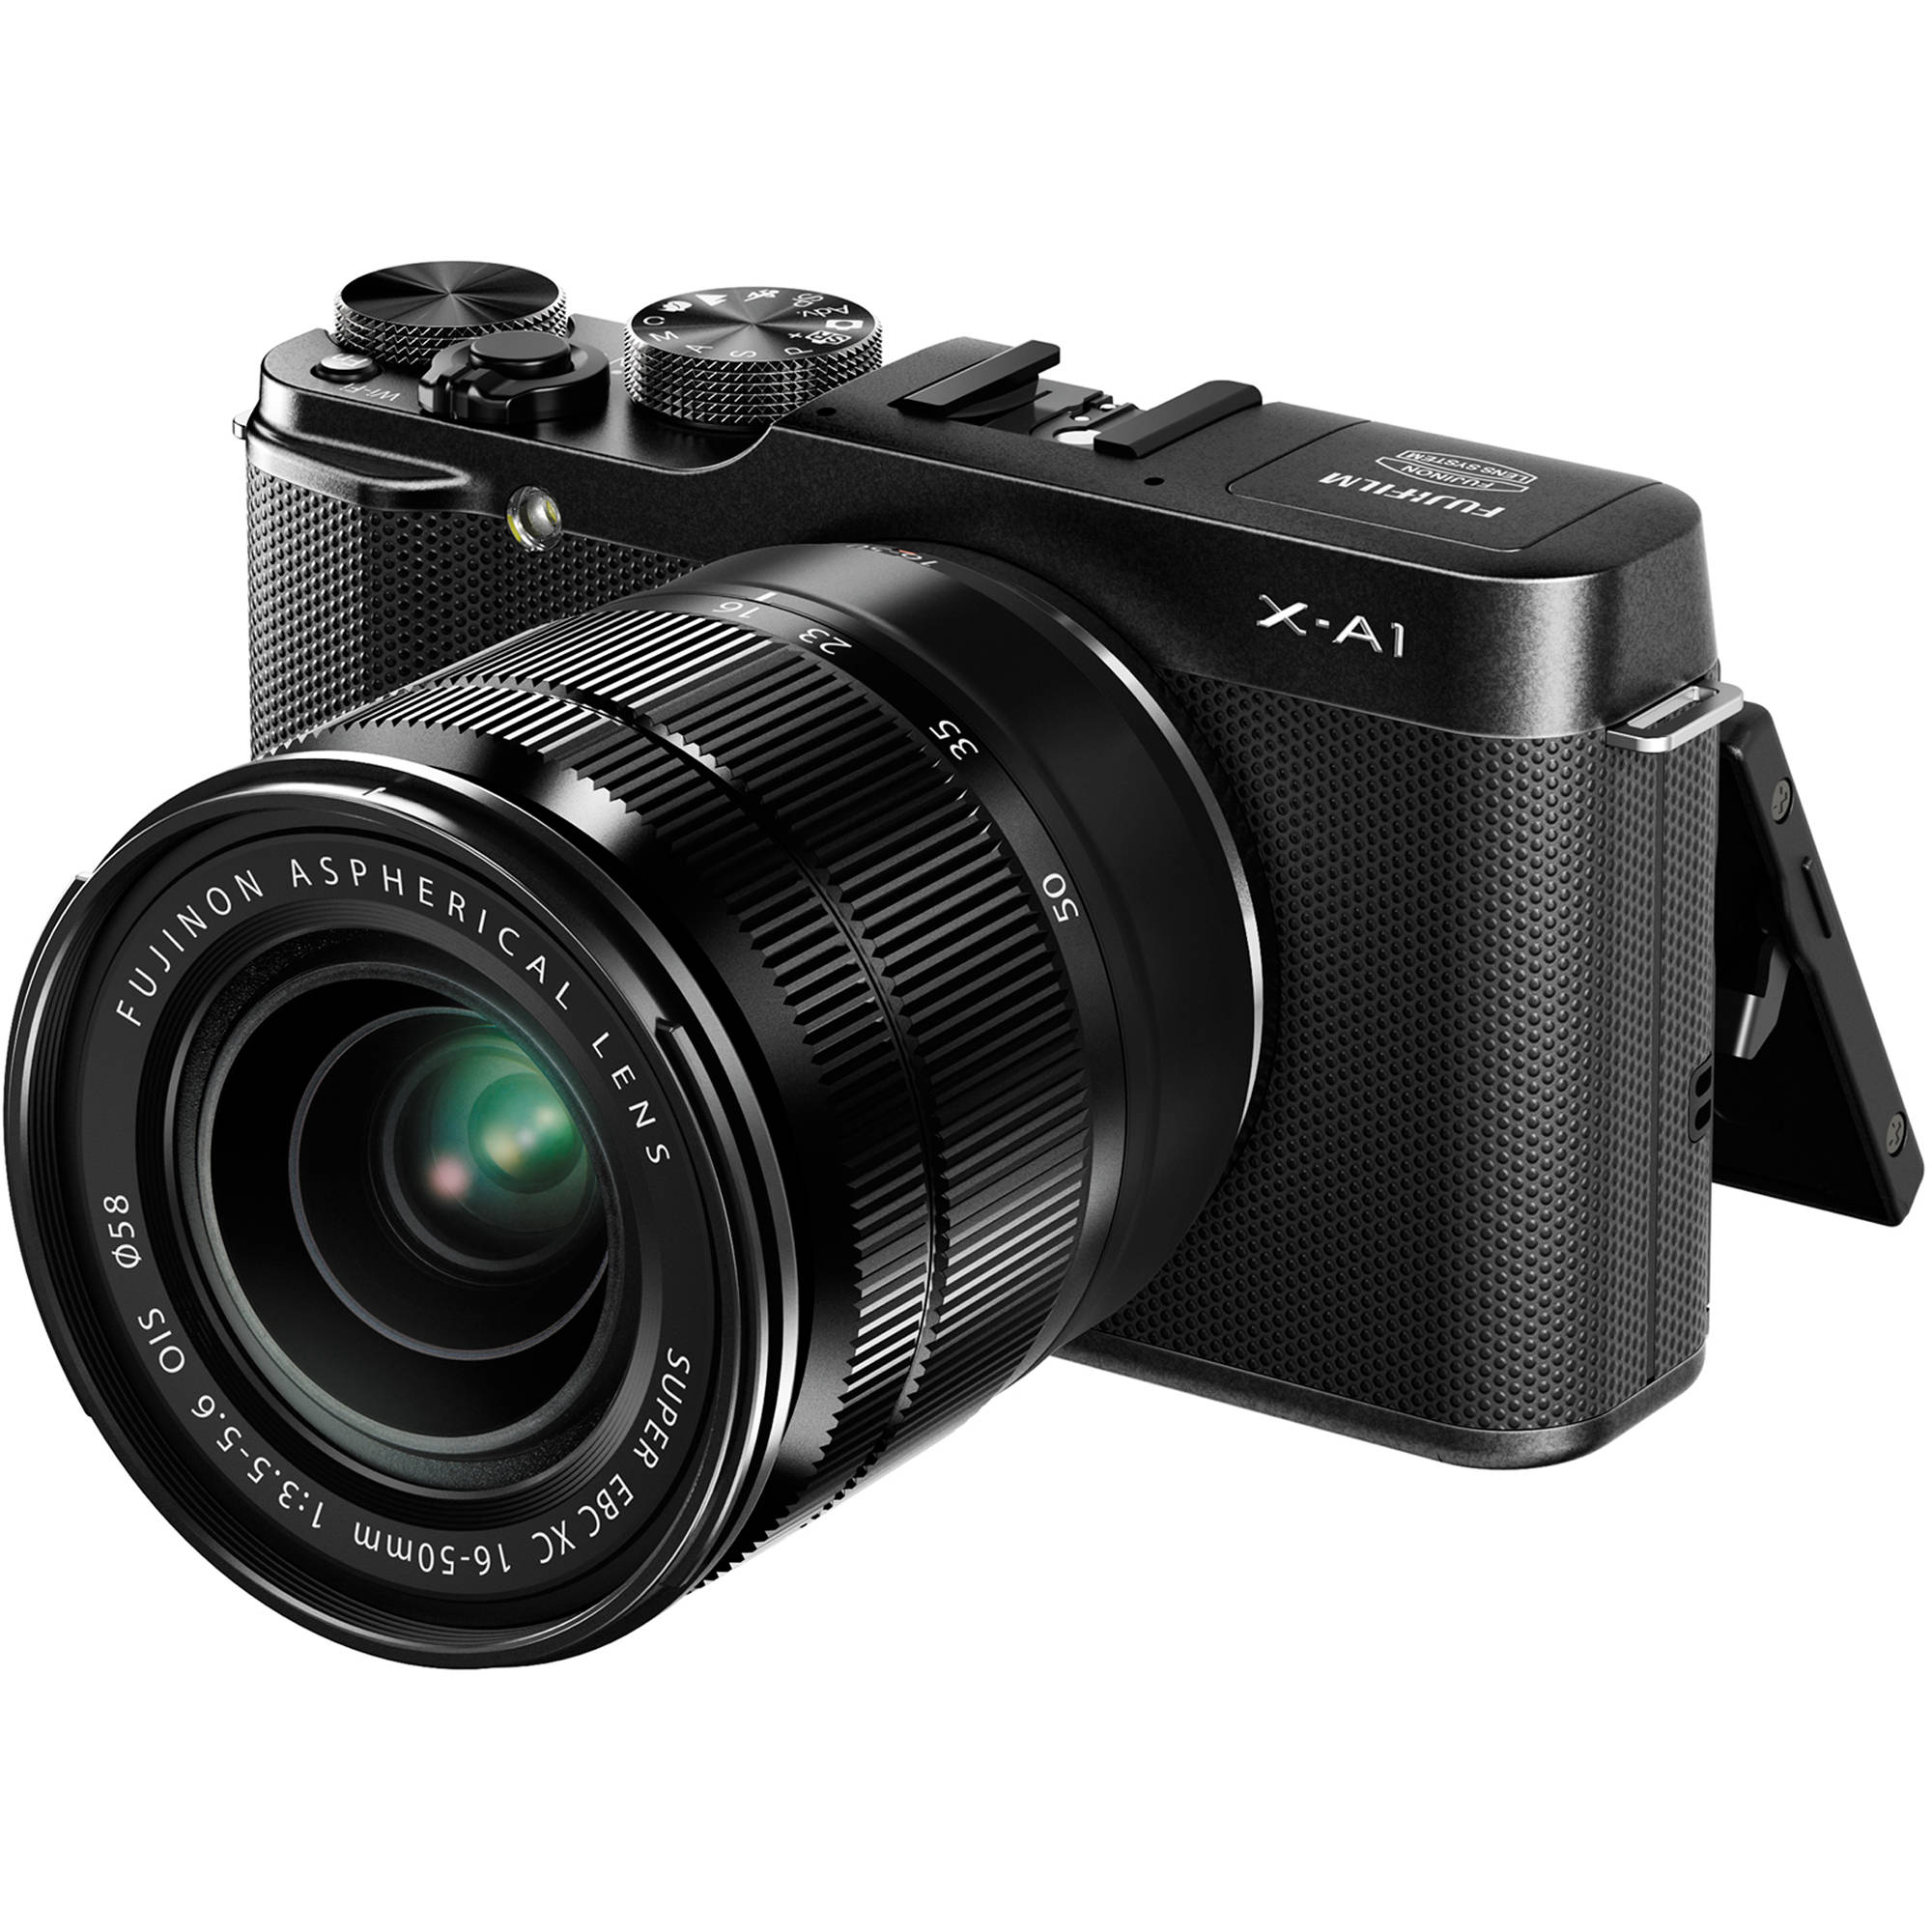 Fujifilm X-A1 announced, Price, Specs, Release Date, Where to Buy – Camera  News at Cameraegg